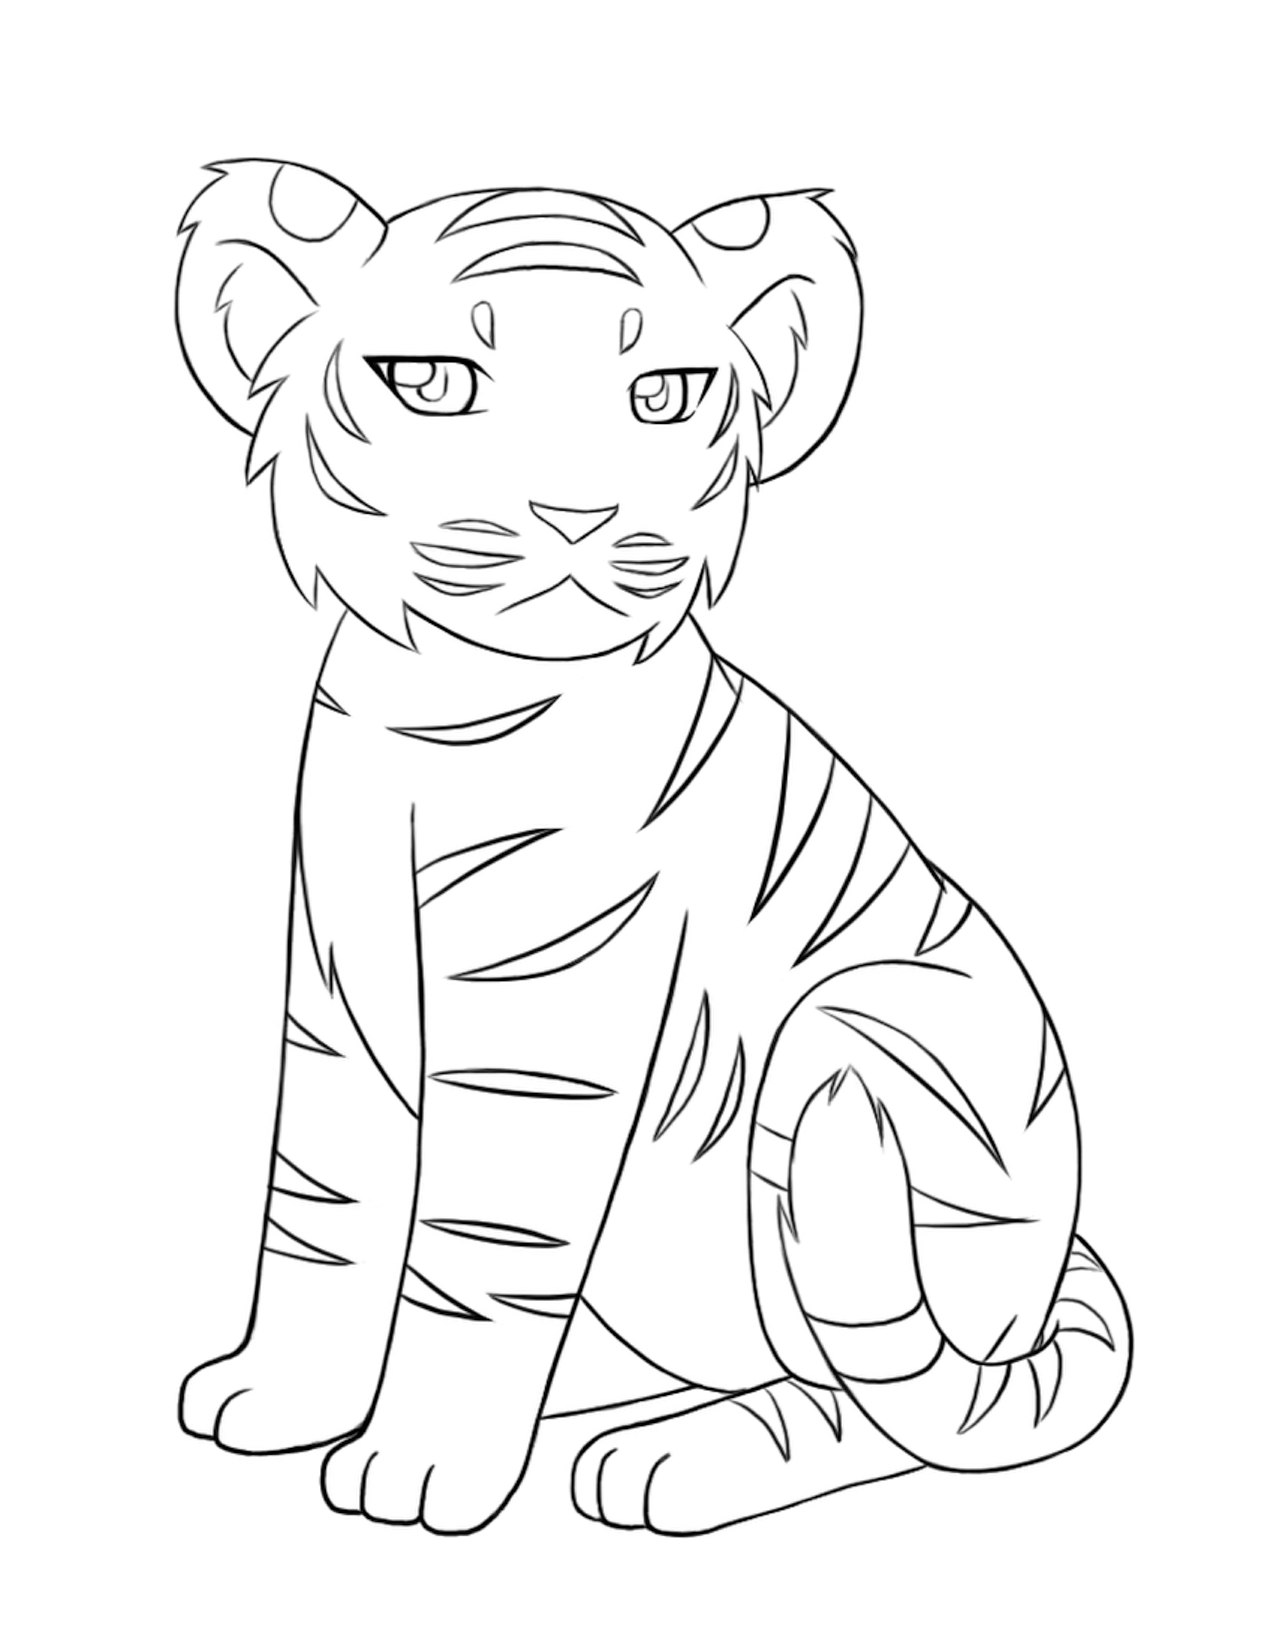 coloring page tiger tiger coloring pages to download and print for free coloring tiger page 